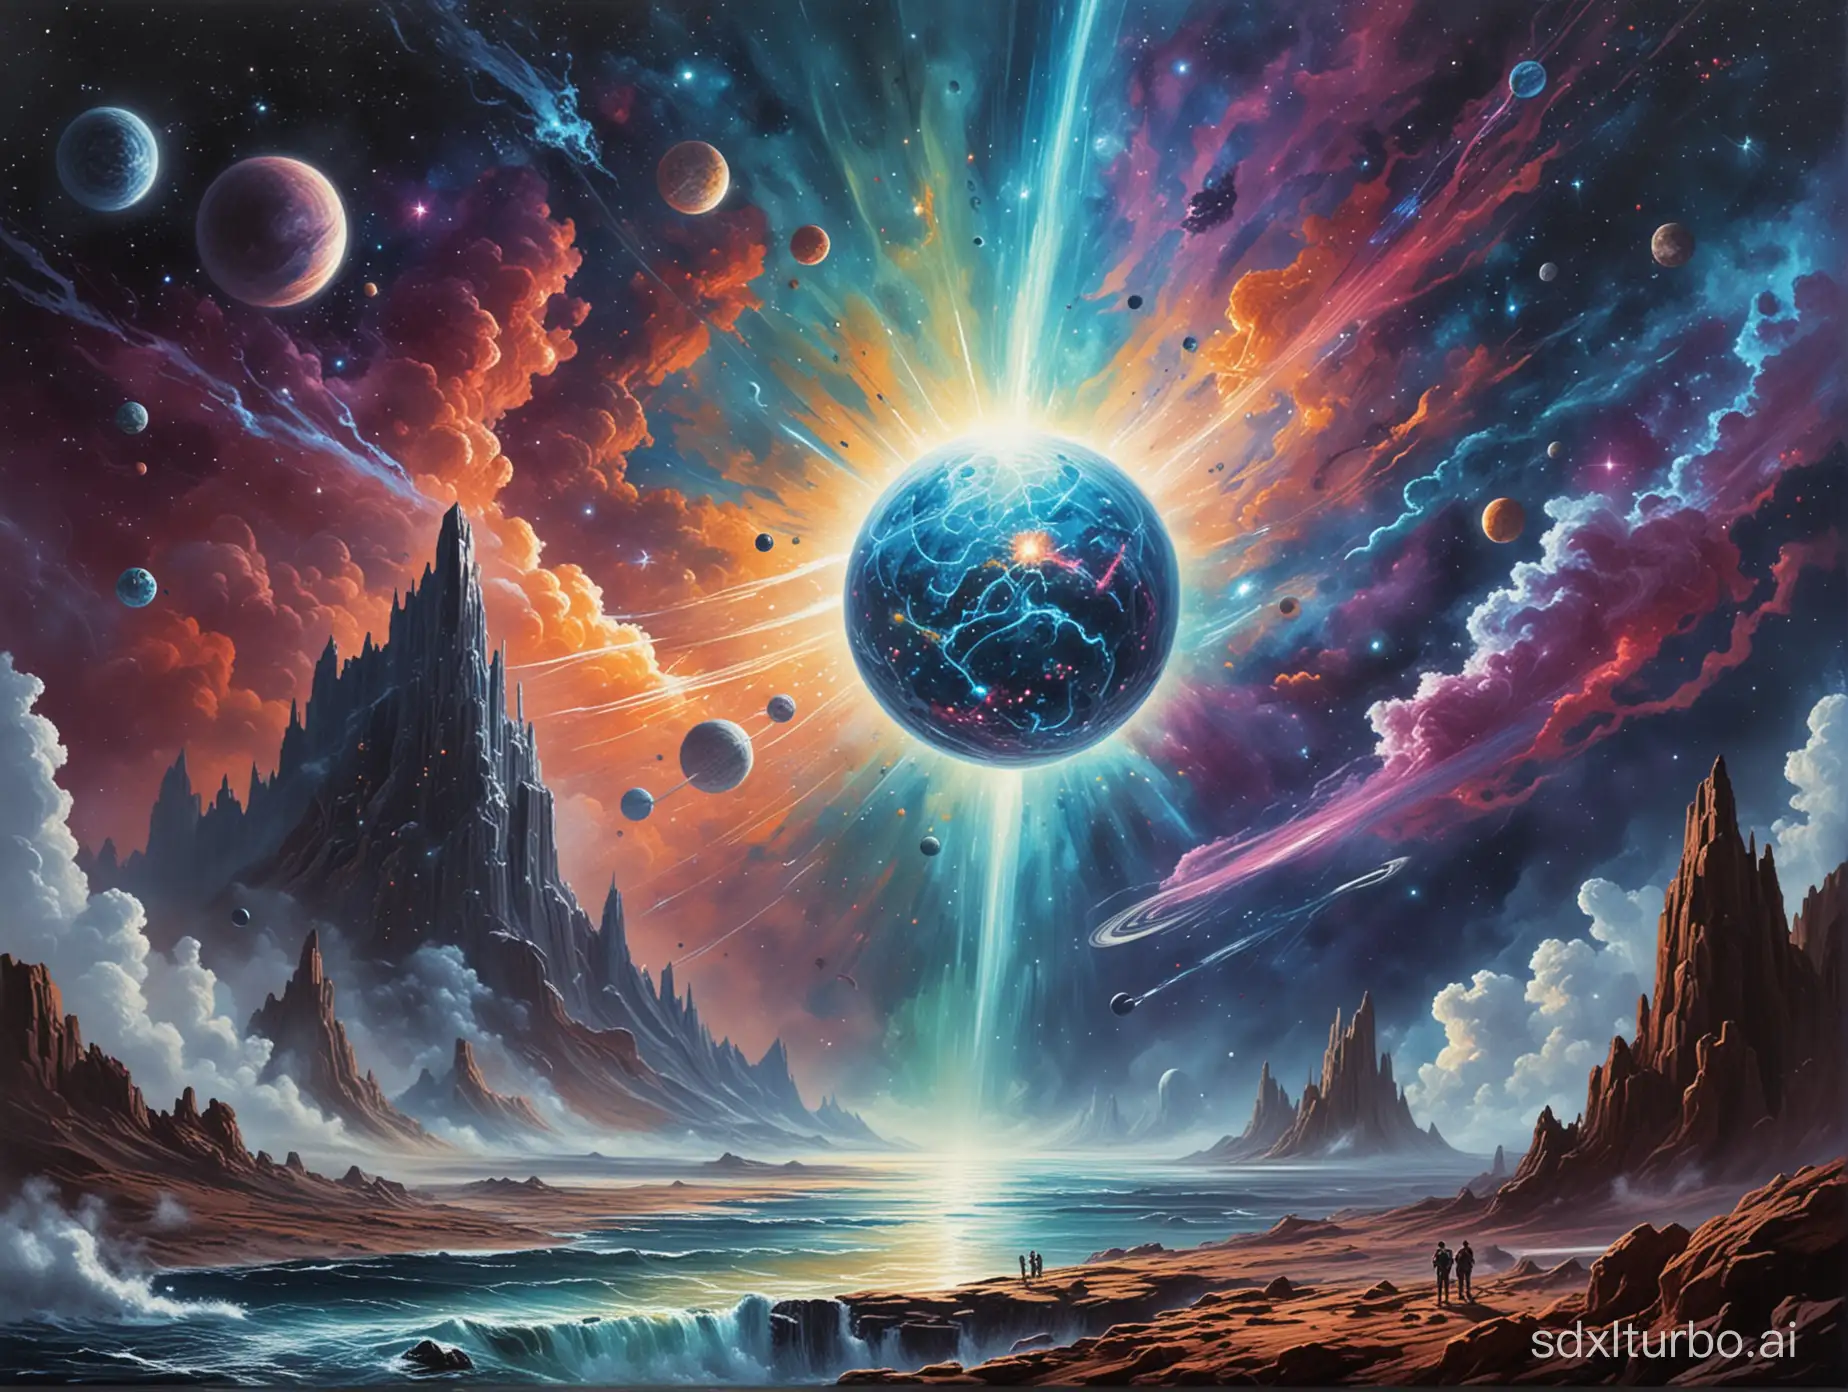 Ethereal-Cosmos-Exploration-Vibrant-Science-Fiction-Art